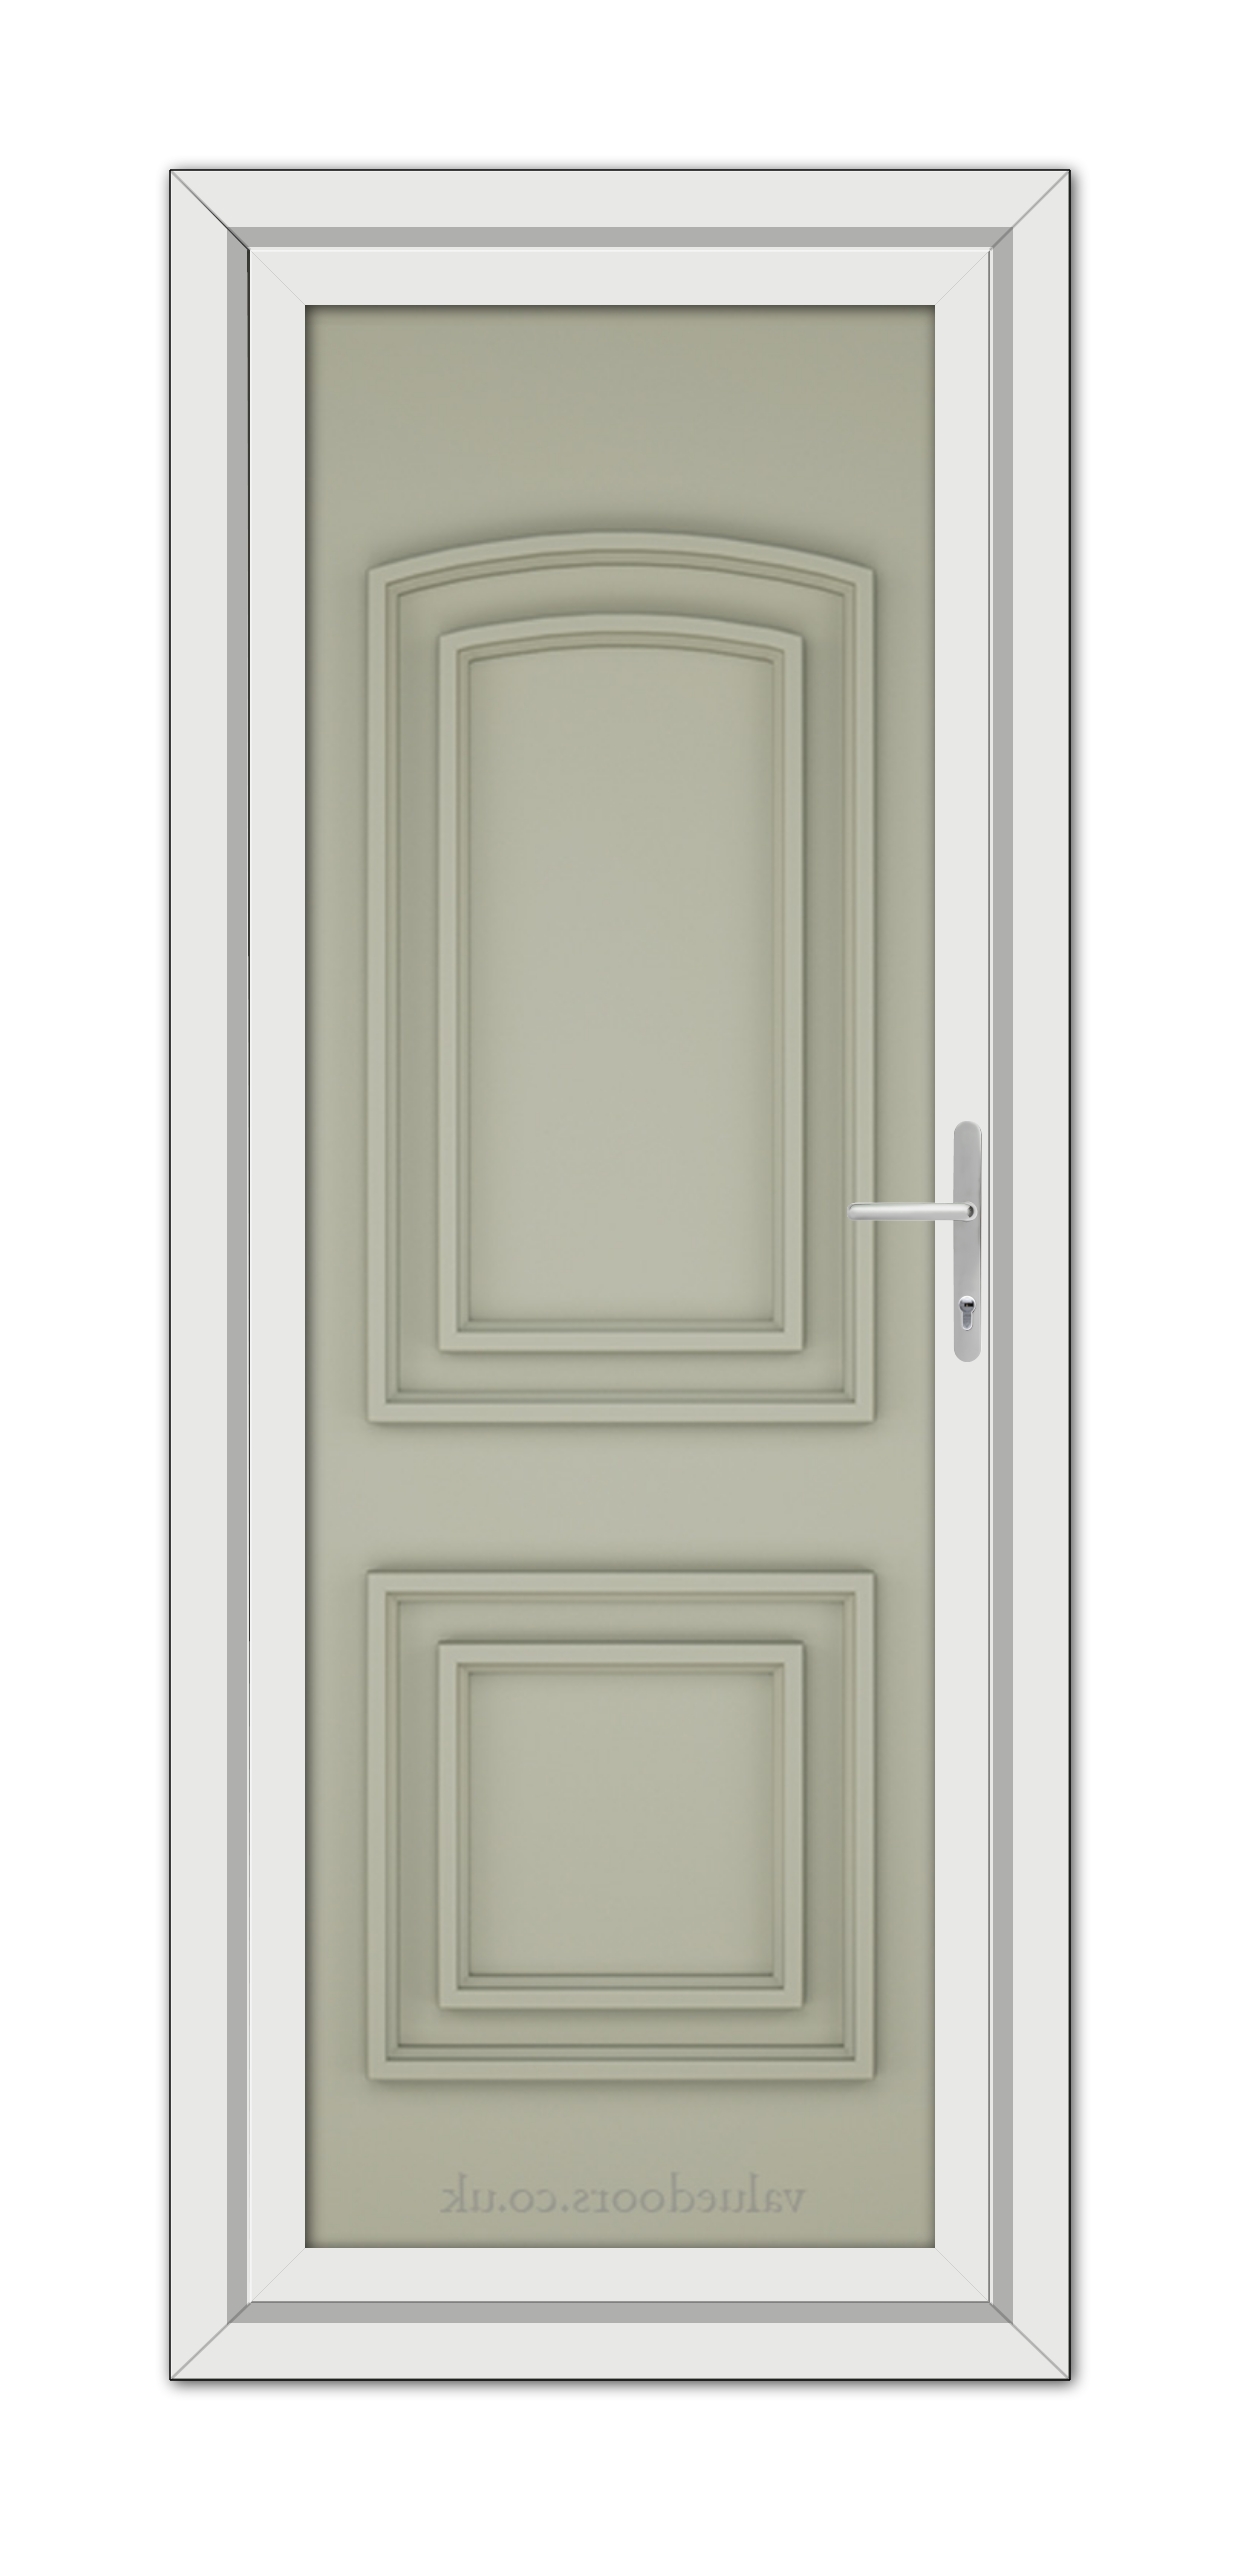 An upright Agate Grey Balmoral Solid uPVC door with a simple handle and a white frame, isolated on a white background.